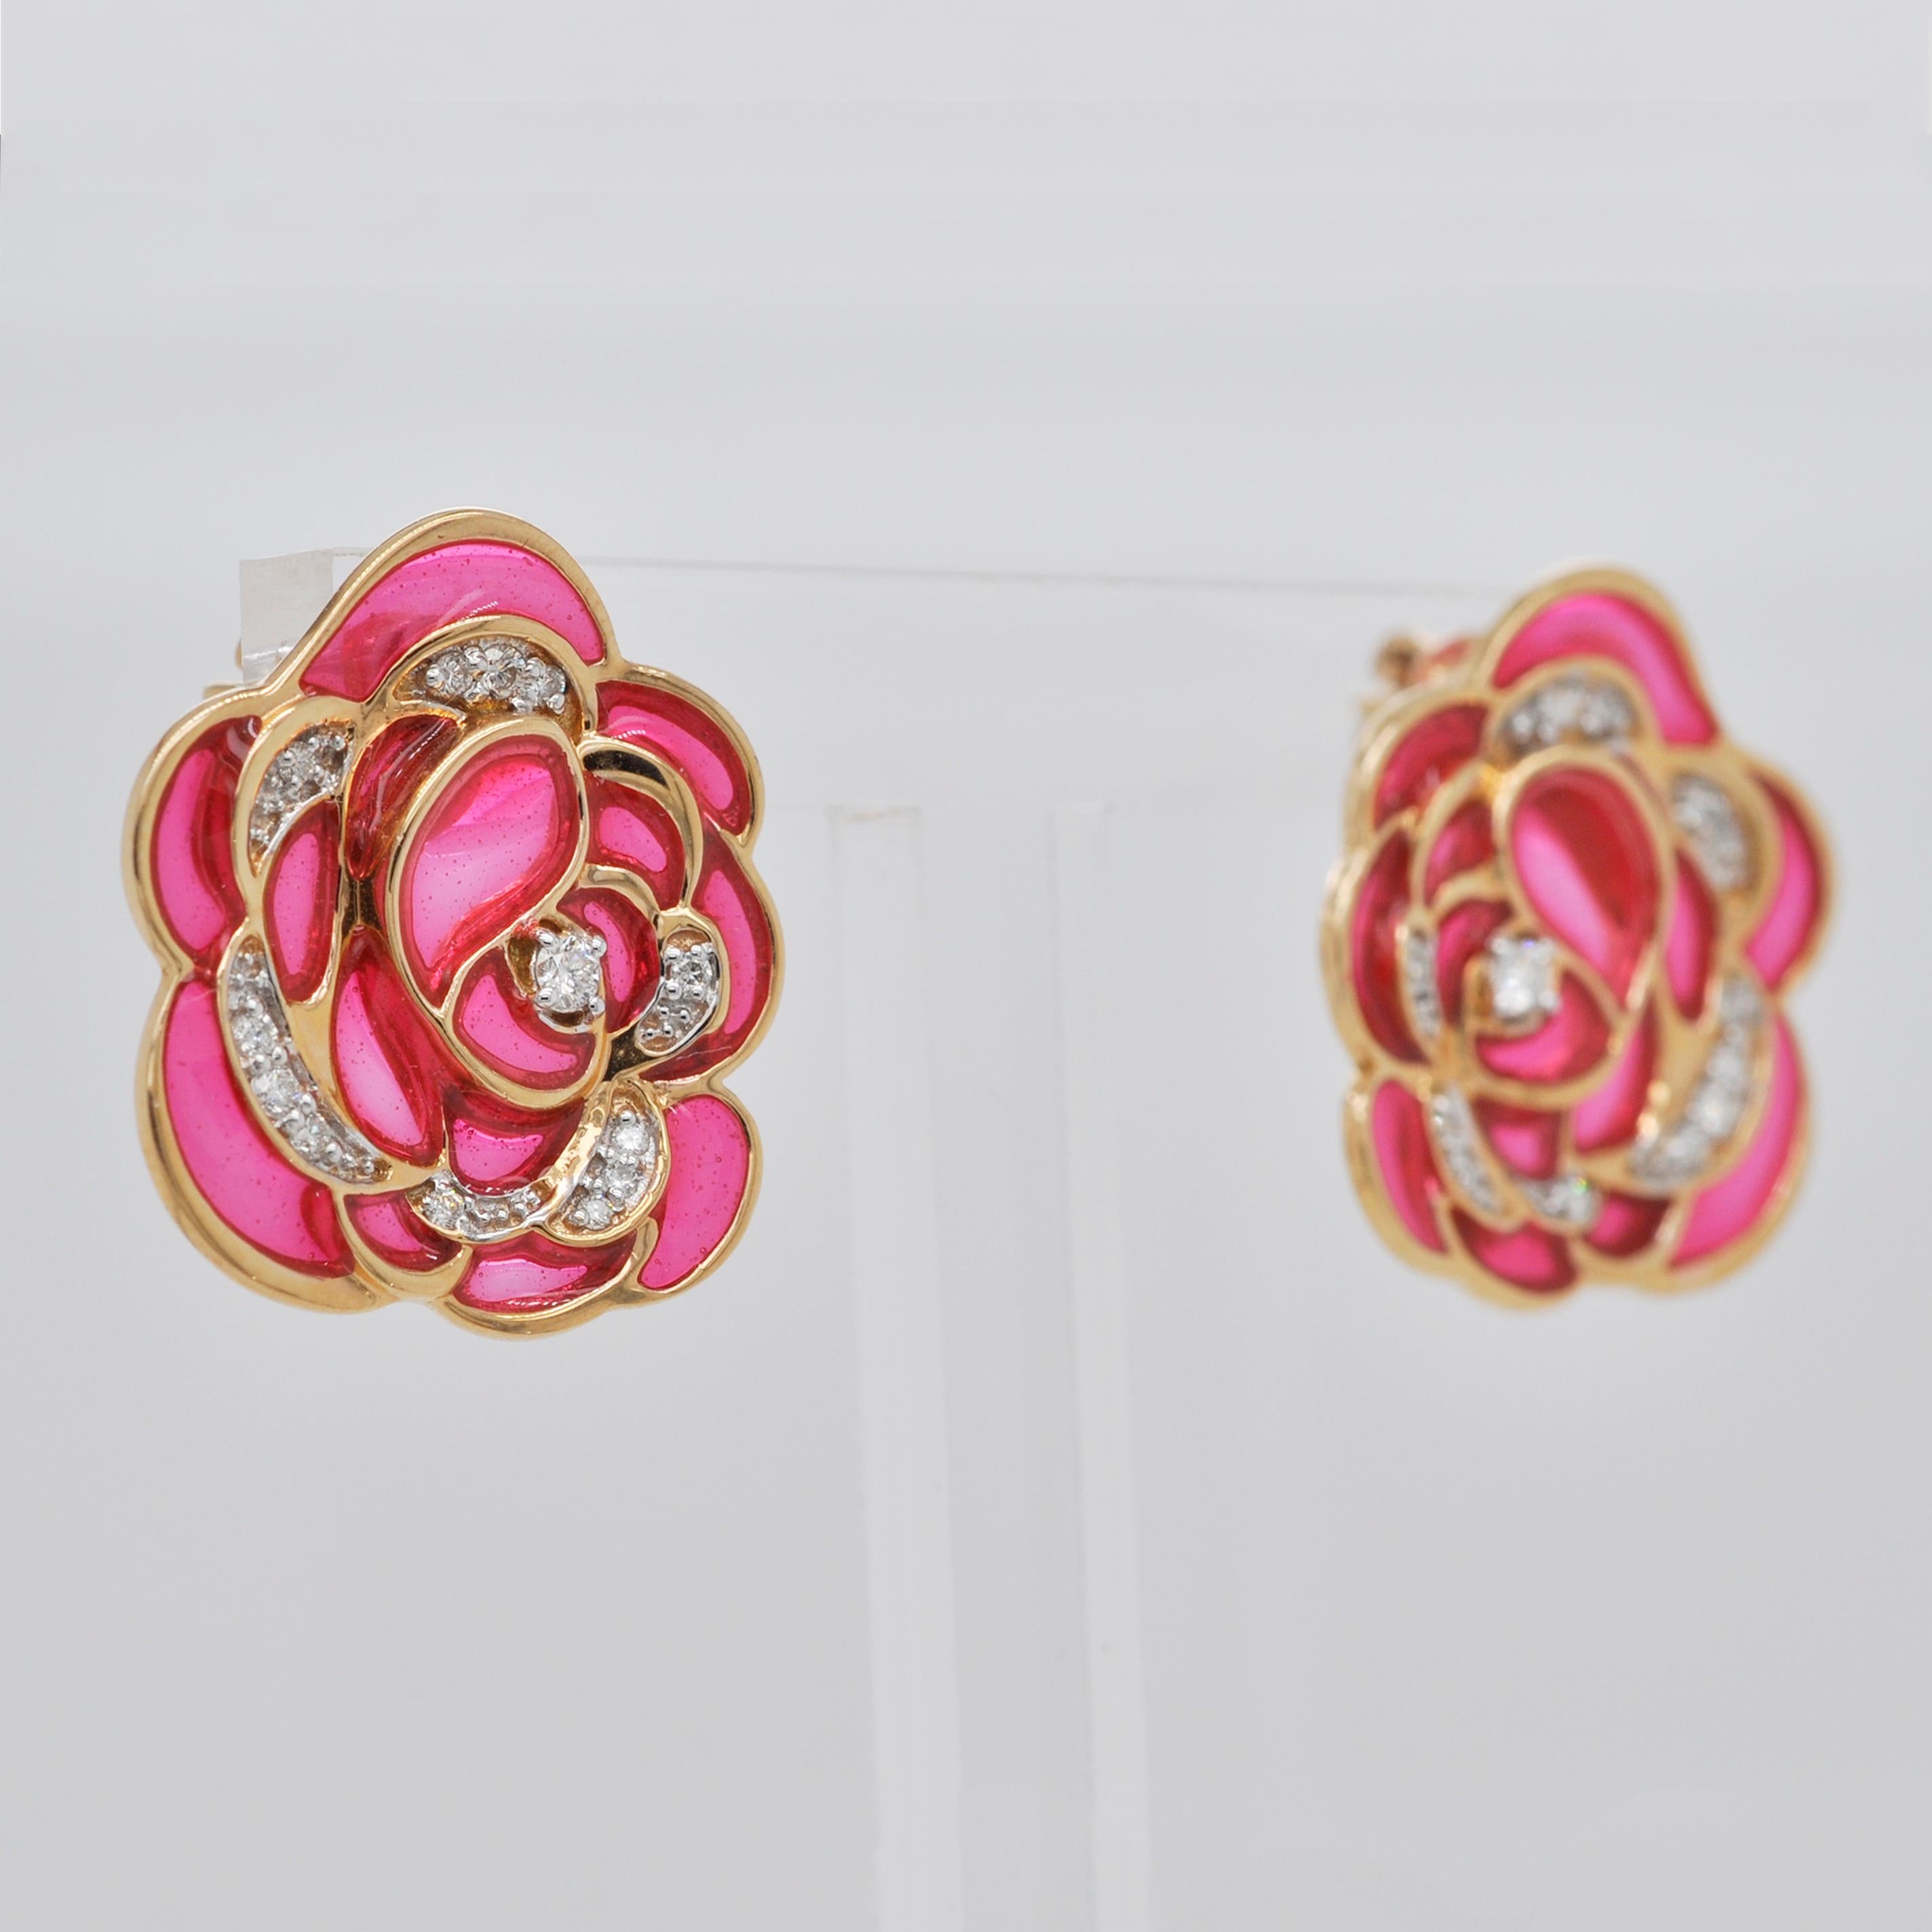 18 Karat Gold Pink Plique-A-Jour Enamel Rose Stud Earrings In New Condition For Sale In Jaipur, Rajasthan